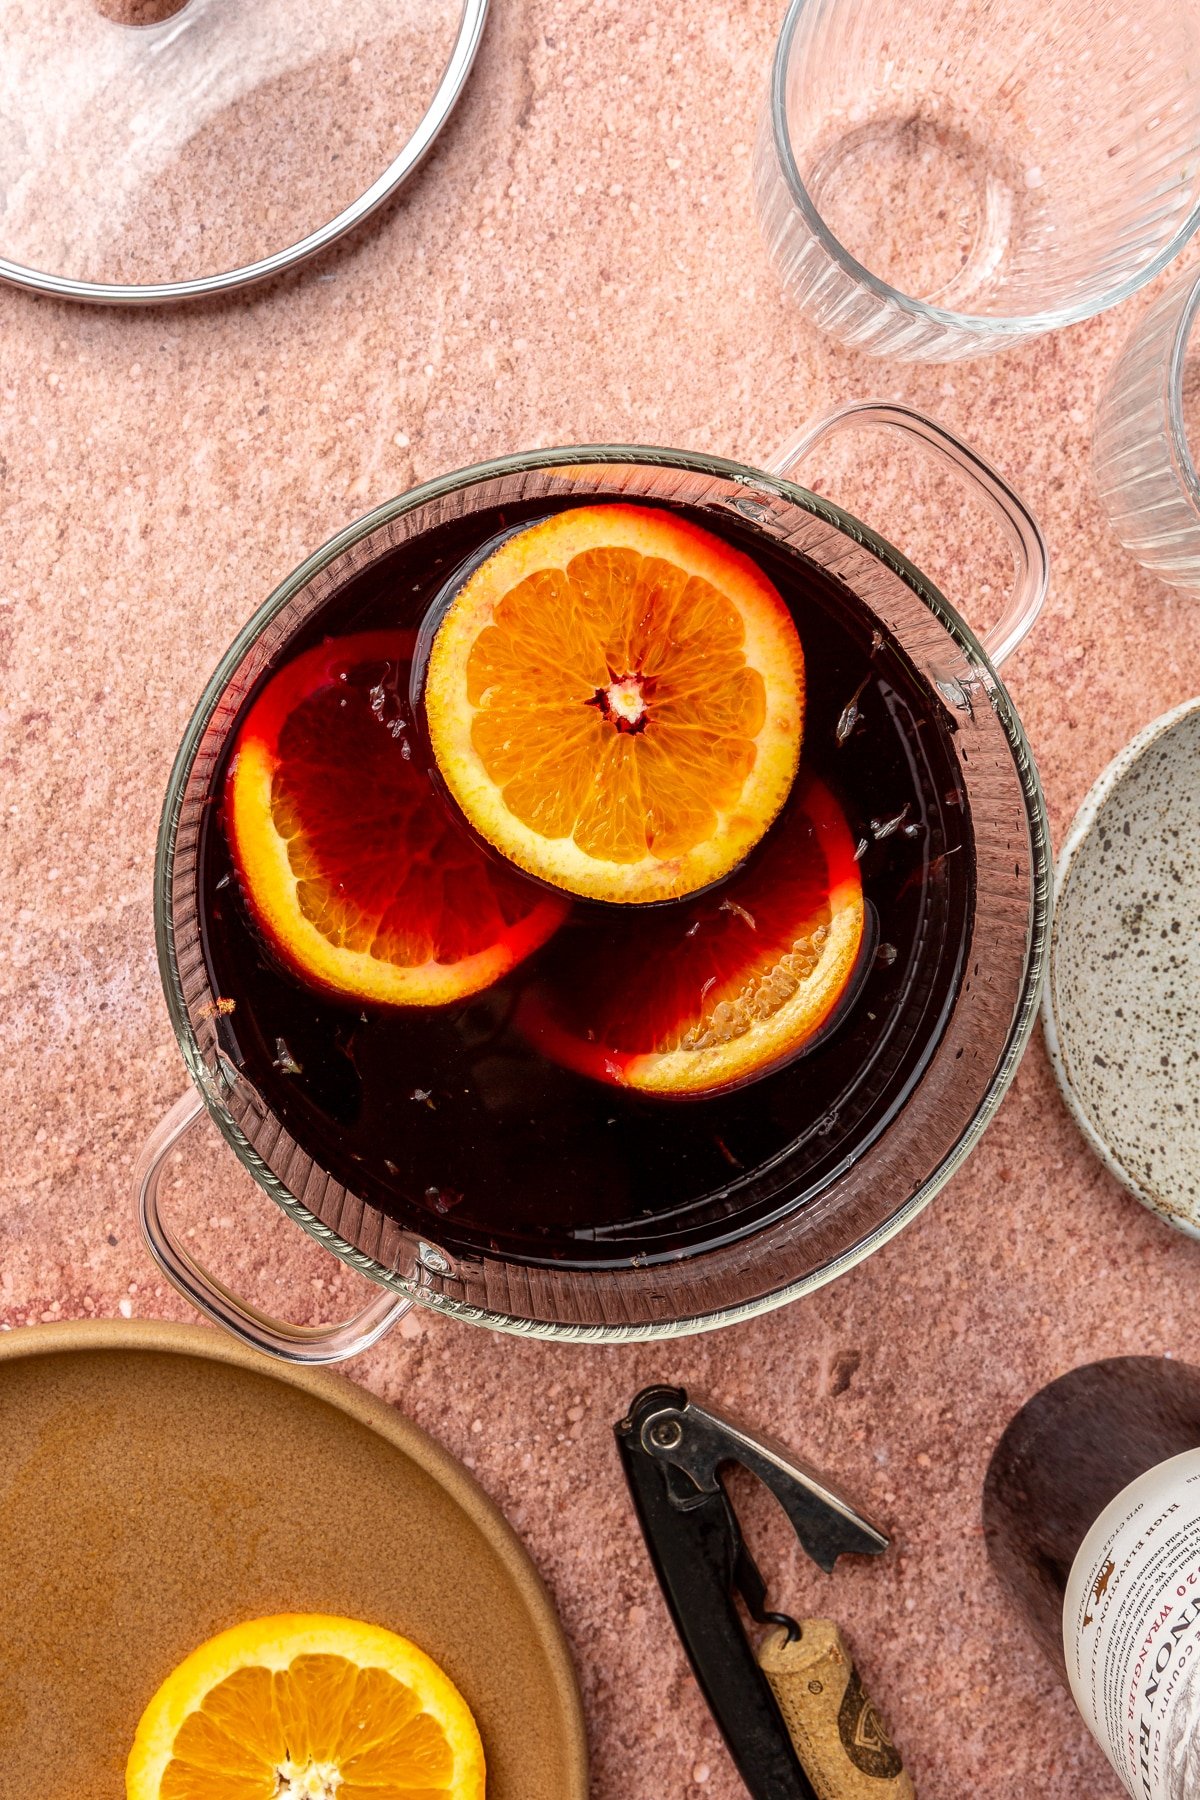 Three orange slices and other ingredients have been added to the wine.